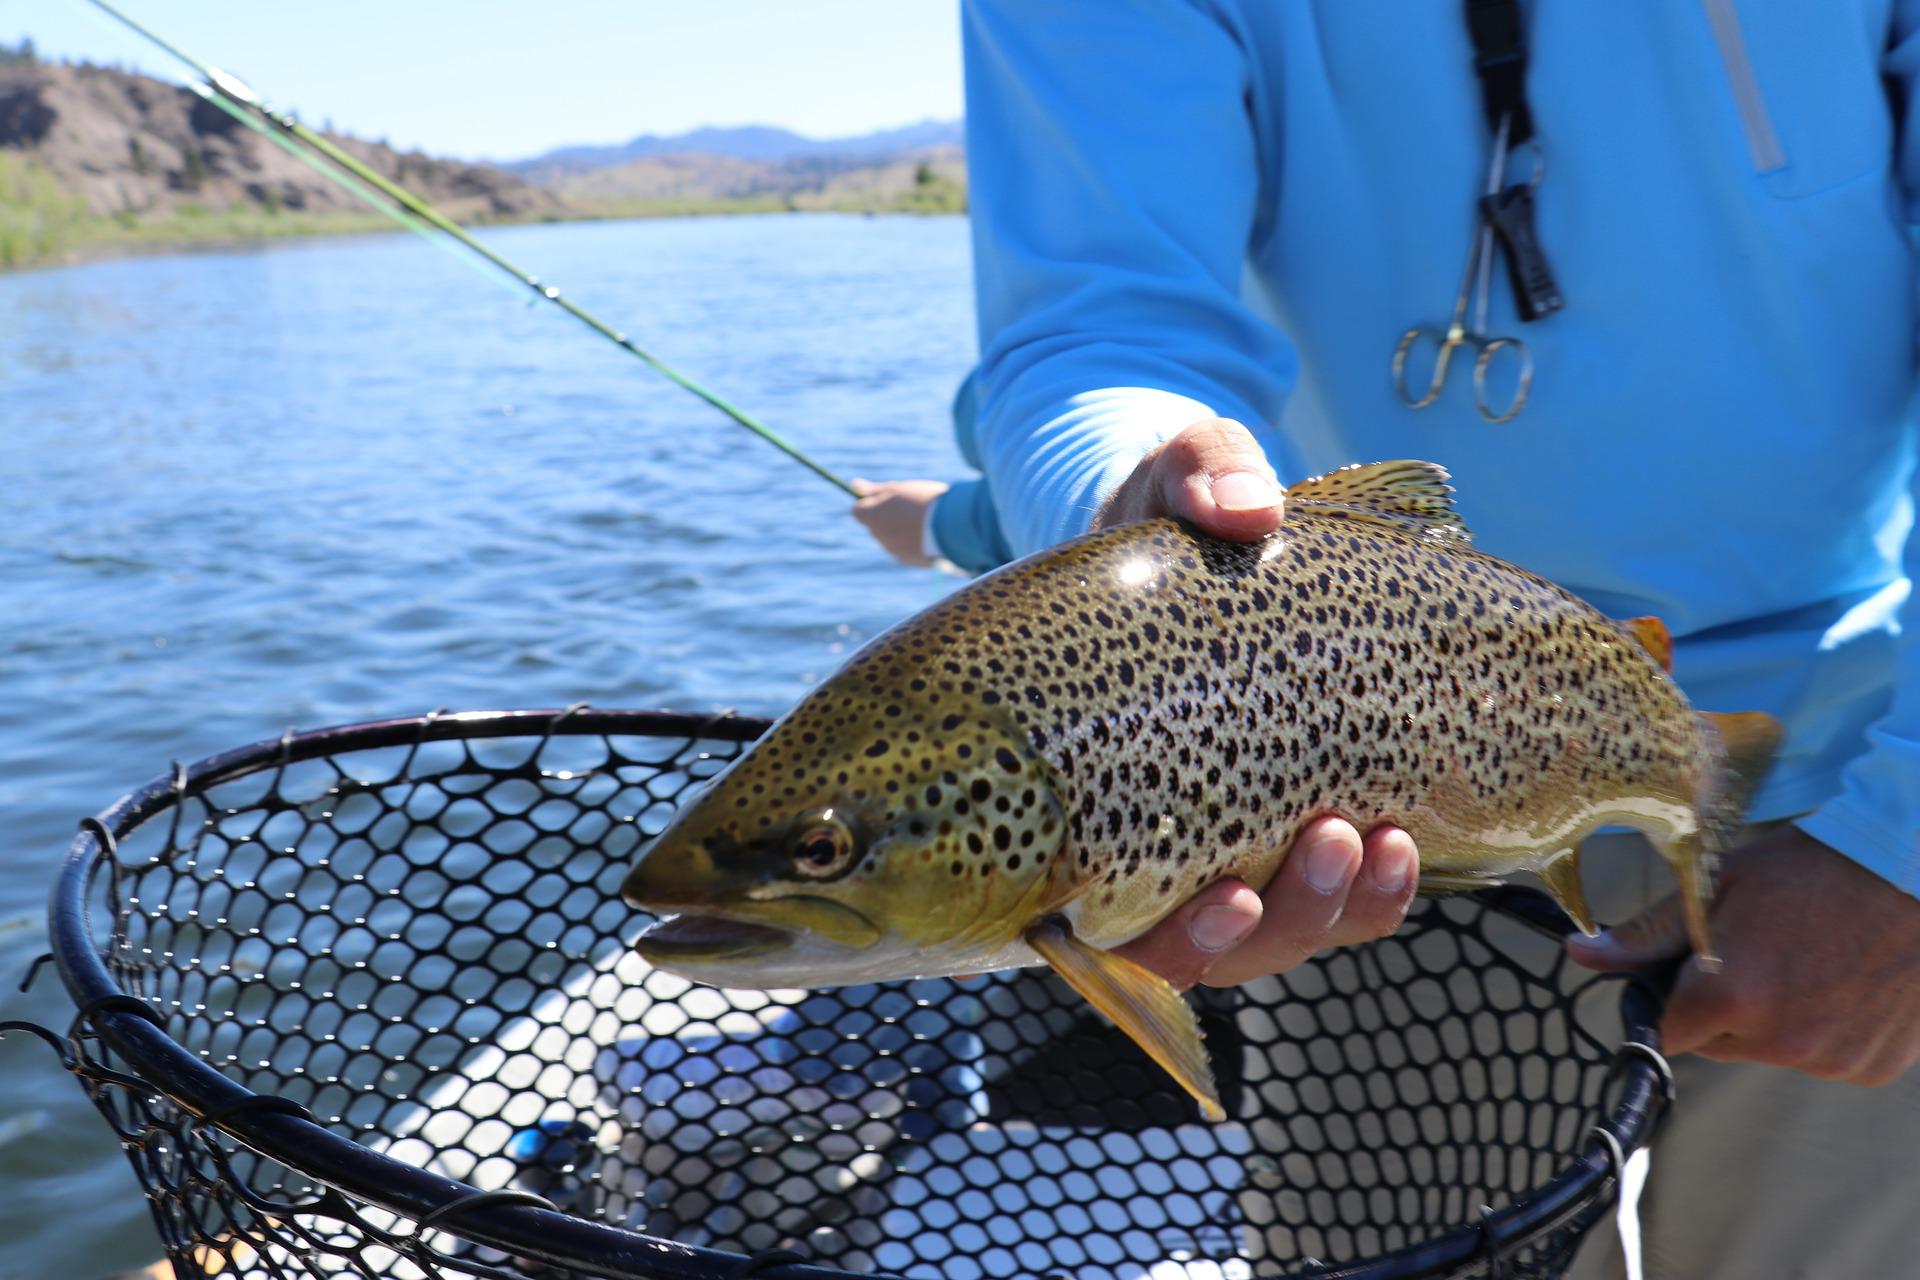 Do Low-Flow, High-Temp Trout Fishing Closures Work?